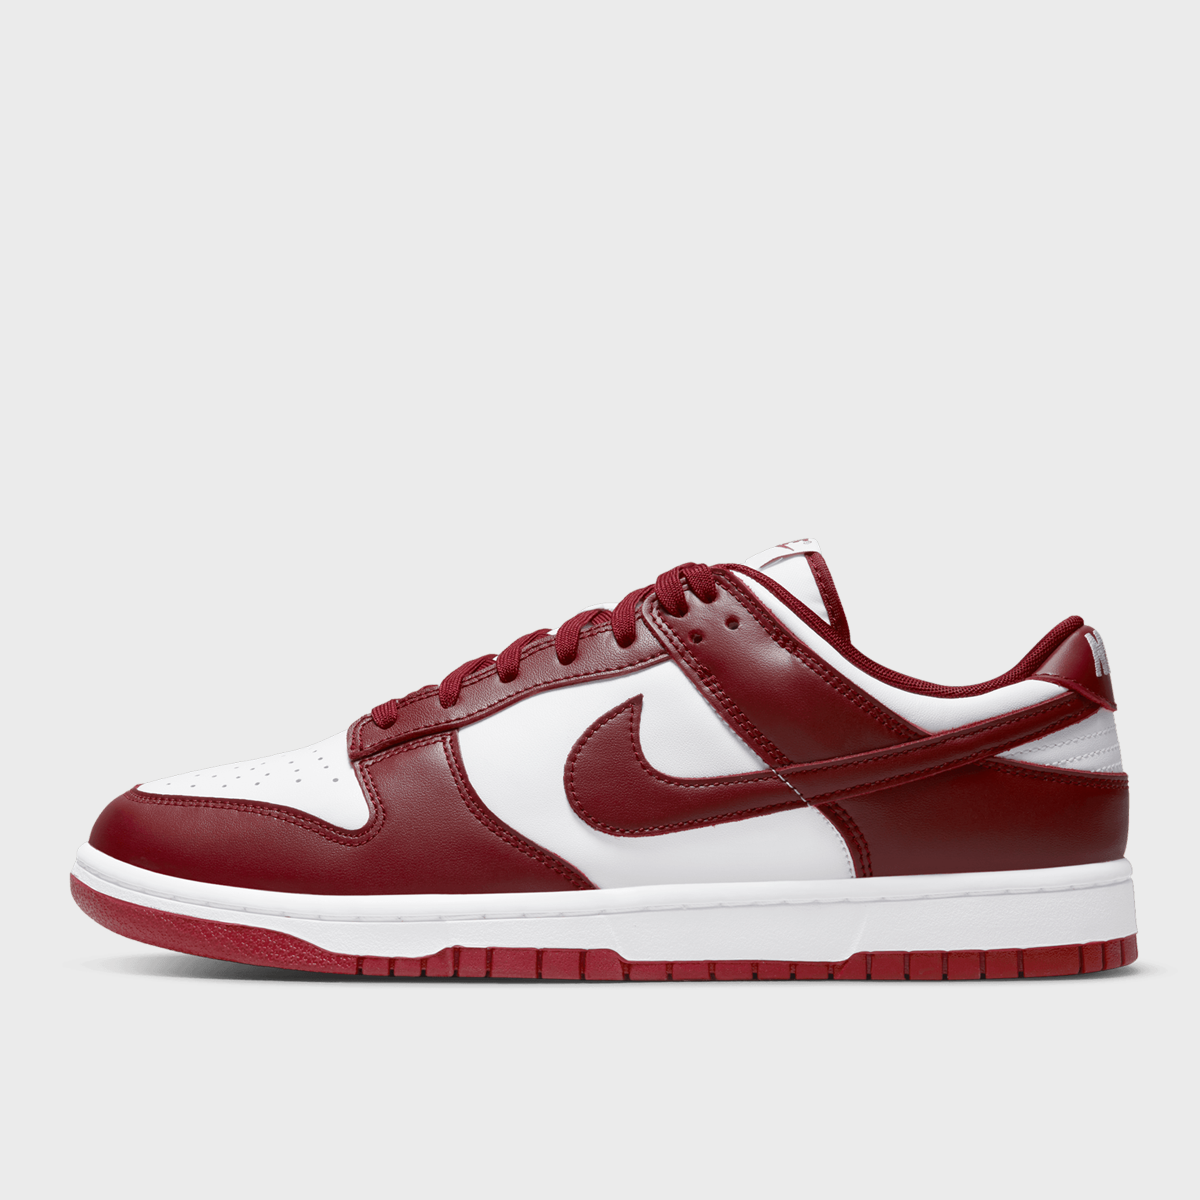 Dunk Low Retro team red/ team red white, NIKE, Footwear, team red/ team red white, taille: 40.5